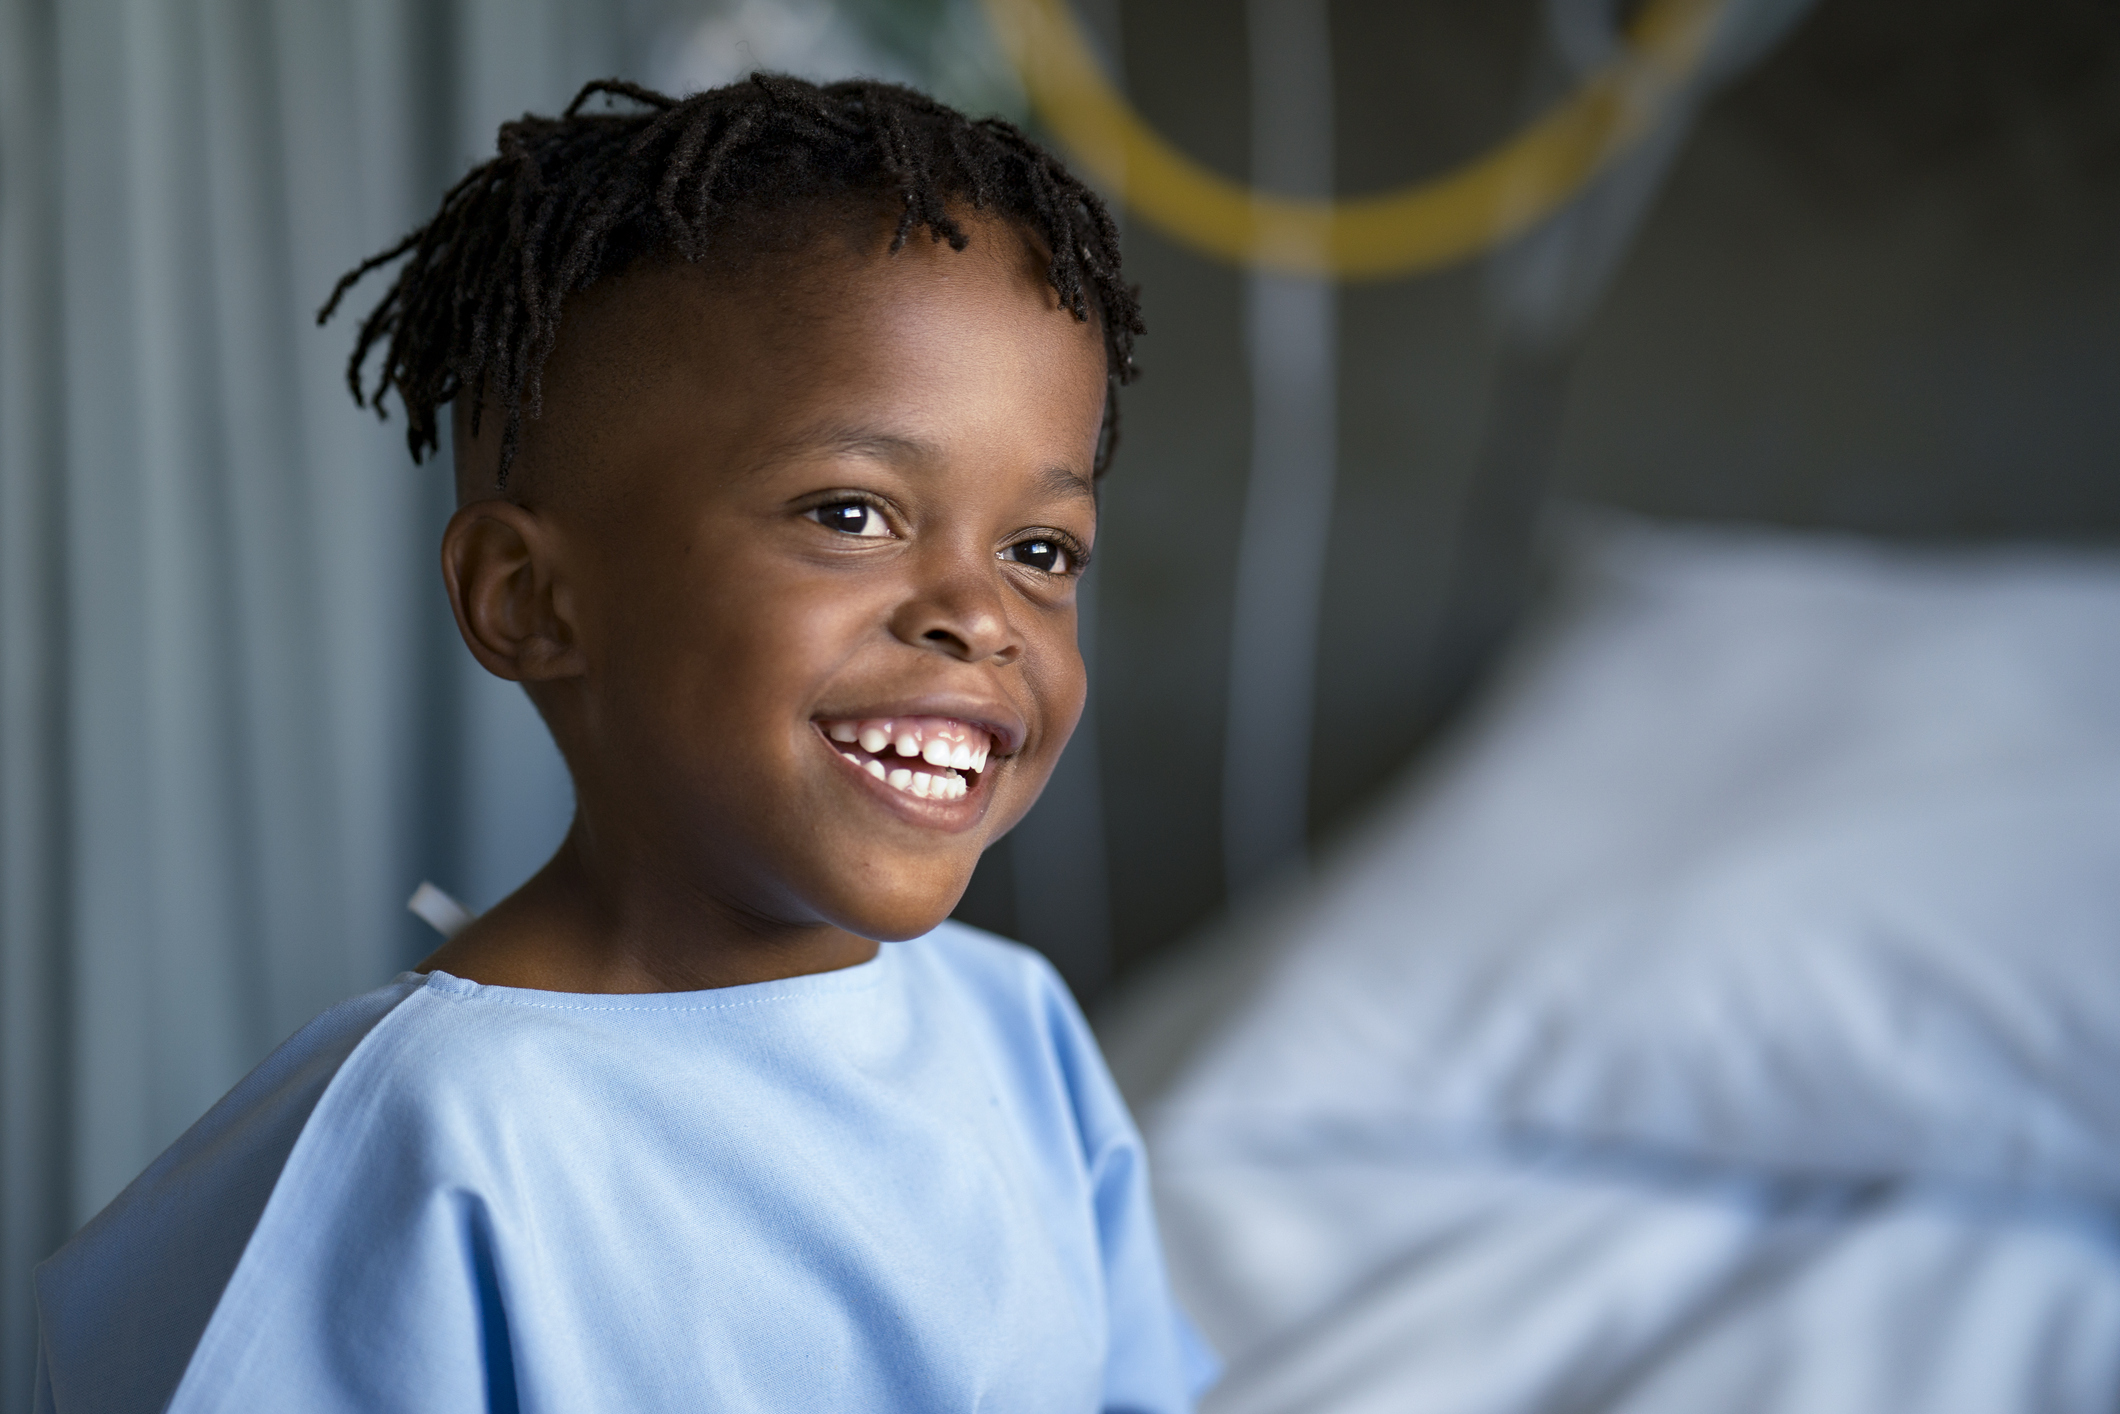 A young boy in a hospital gown ready for medical procedure